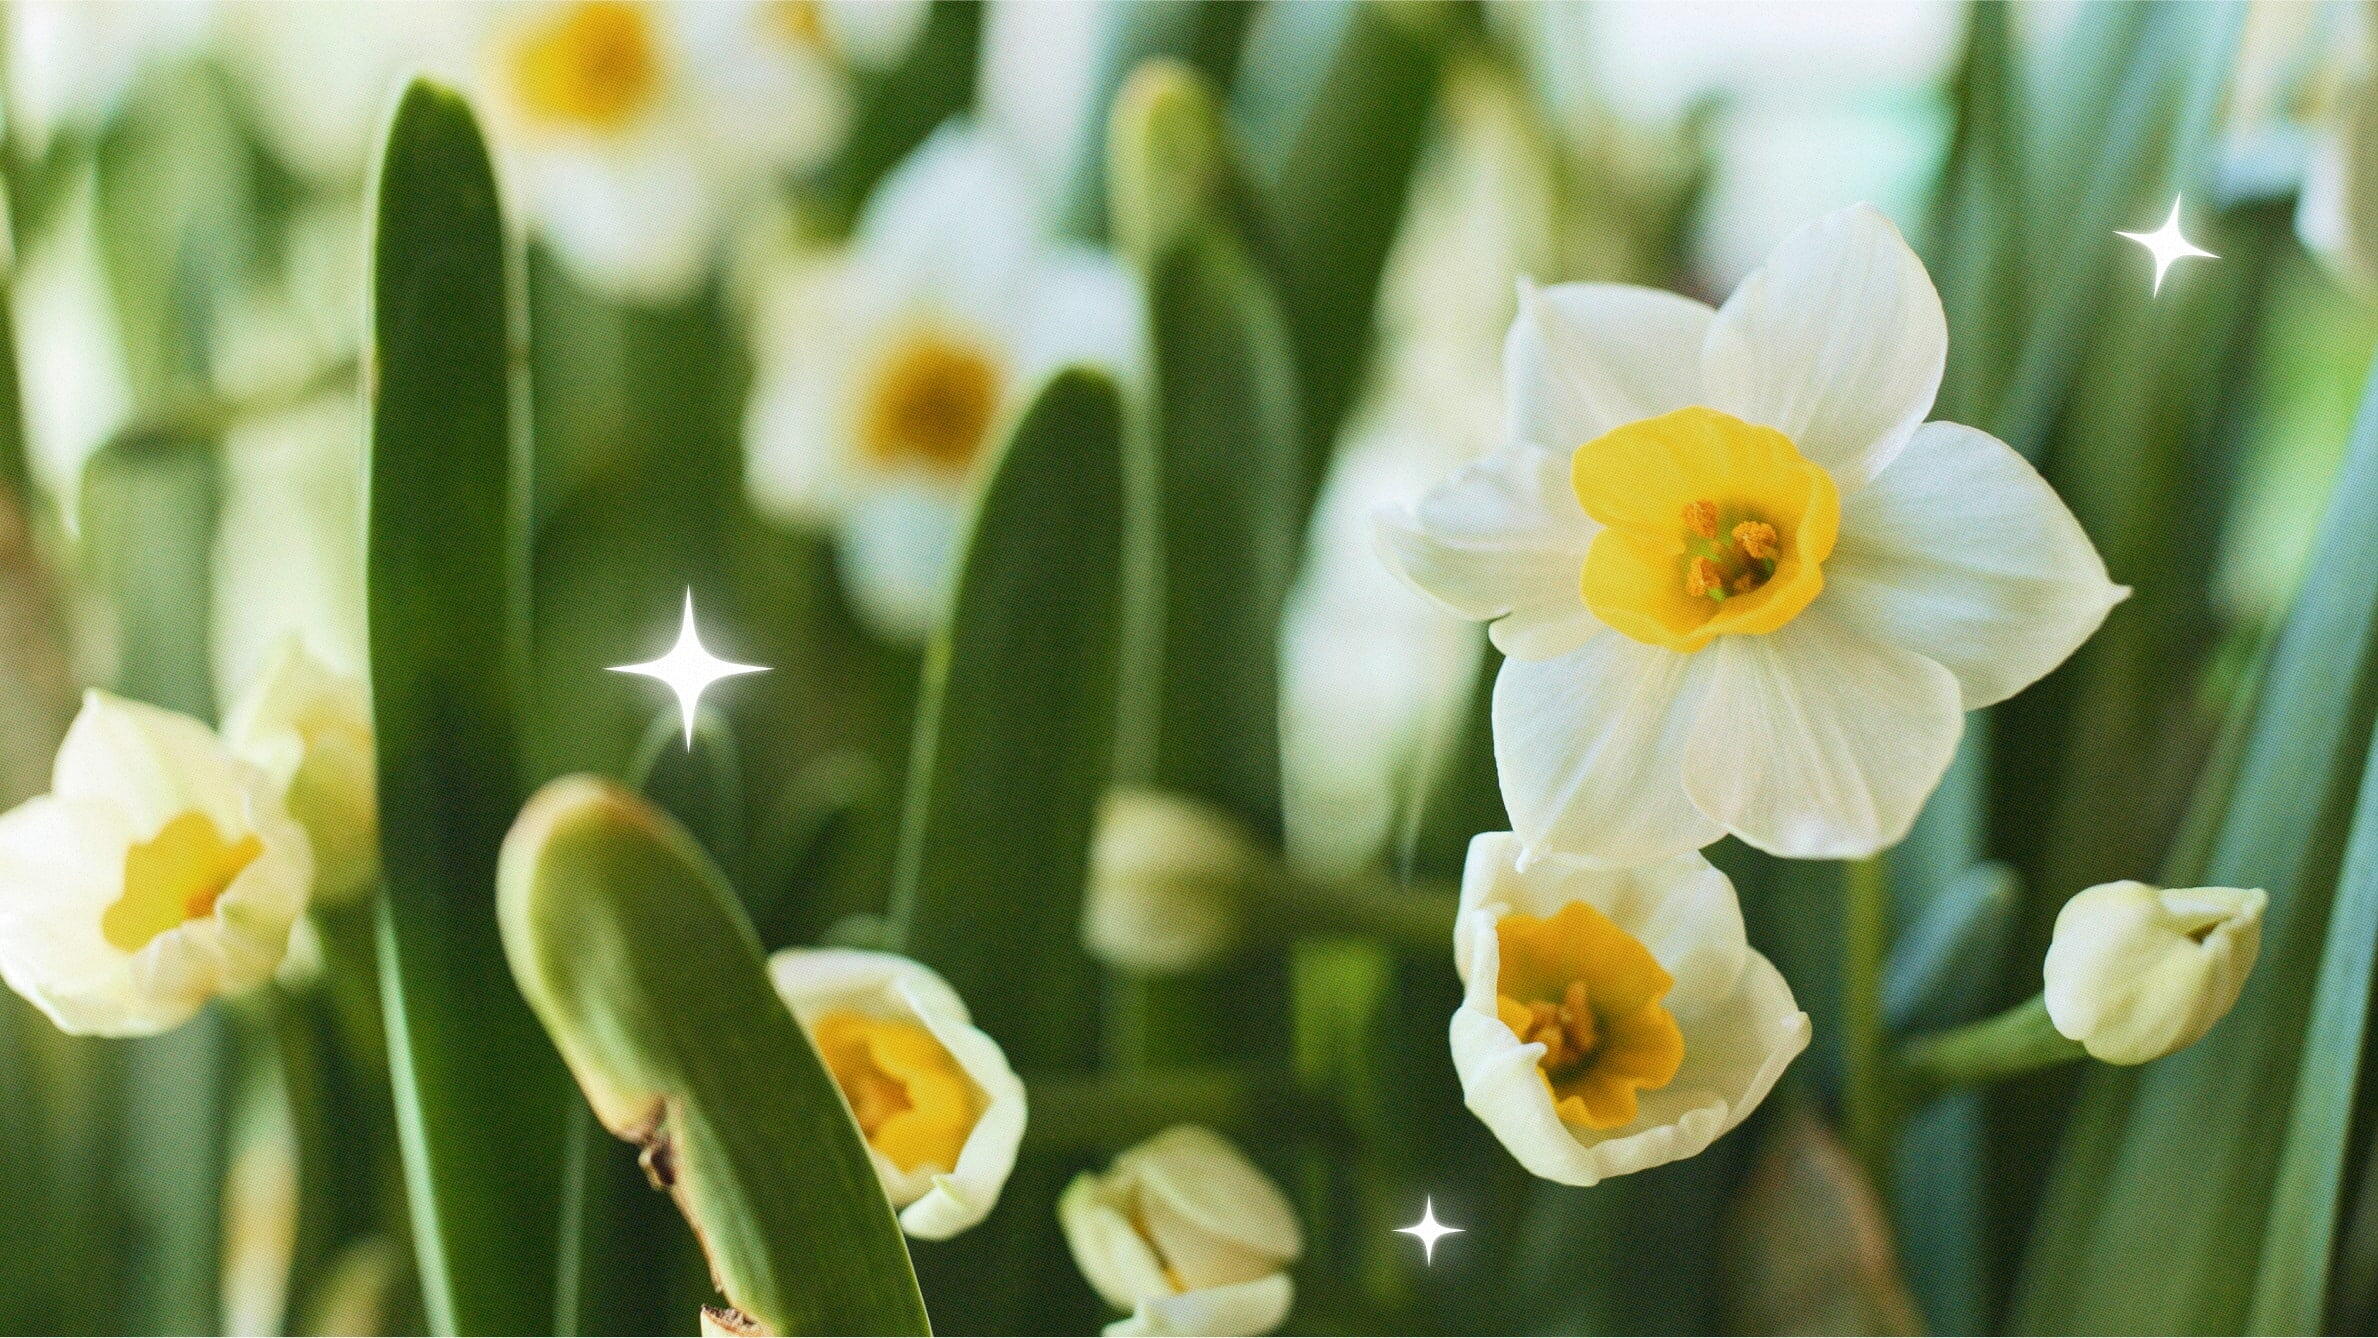 Narcissus Flower Meaning and Symbolism